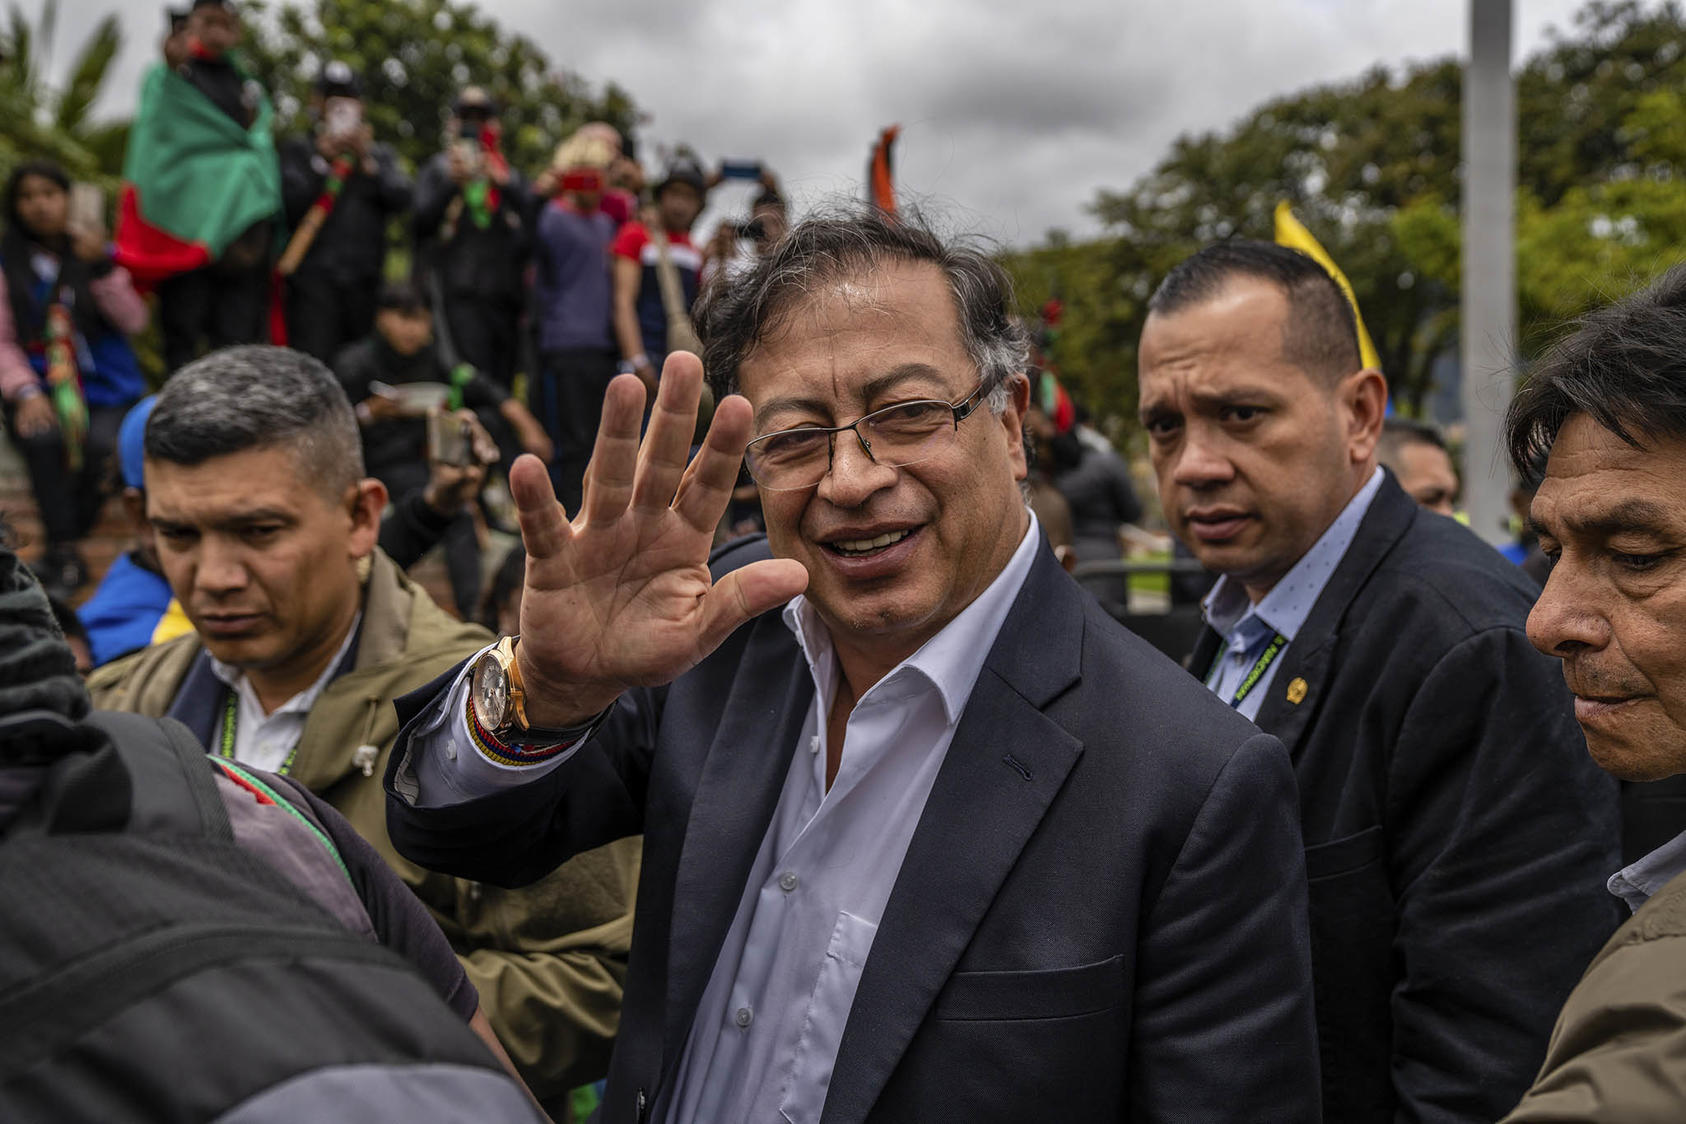 Colombian President Gustavo Petro arrives at presidential inauguration ceremonies in Bogotá, Colombia. August 6, 2022. (Federico Rios/The New York Times)